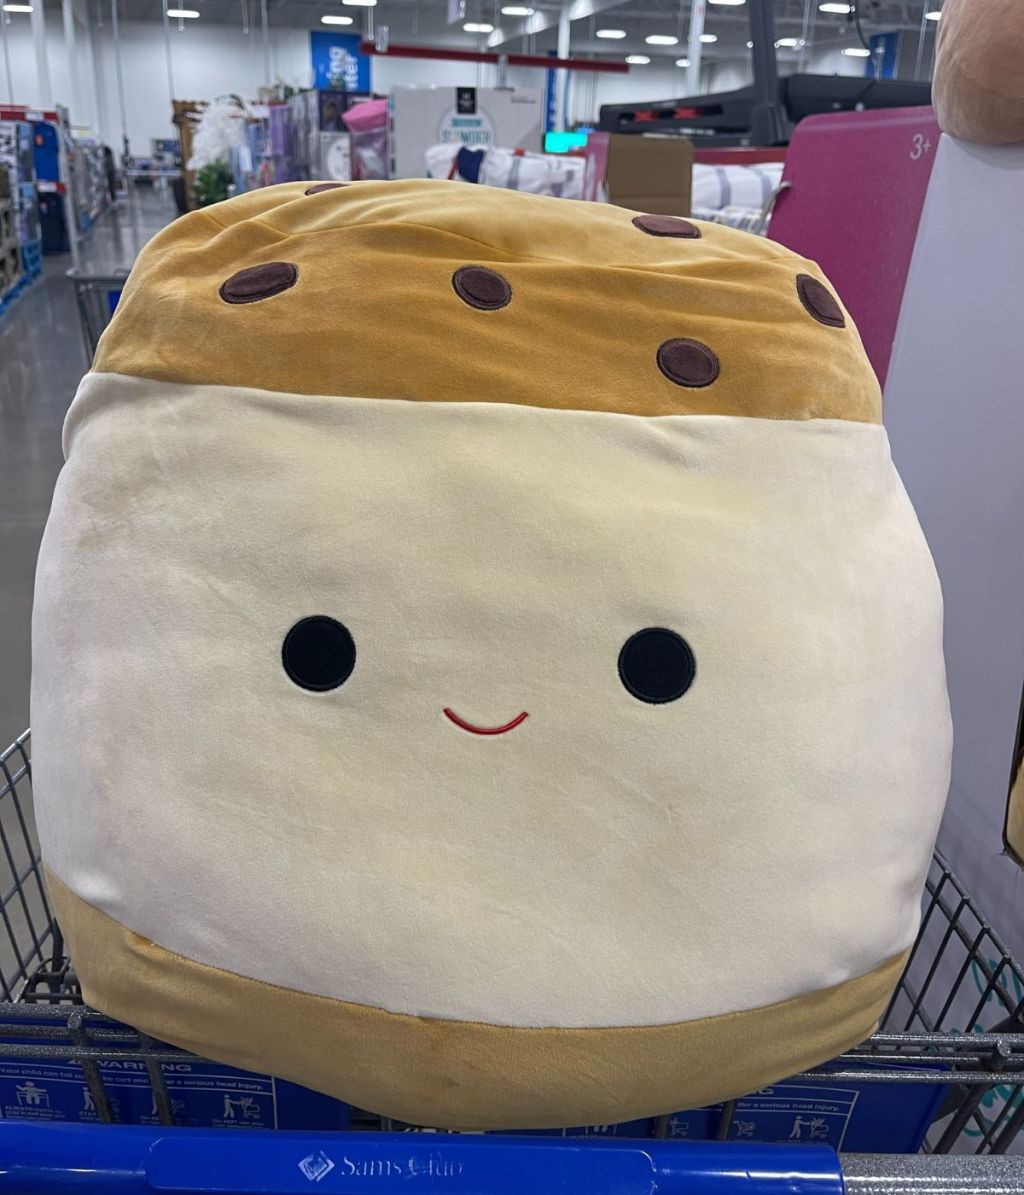 large size Chocolate Chip Ice Cream Sandwich Squishmallow in cart at Sam's Club 